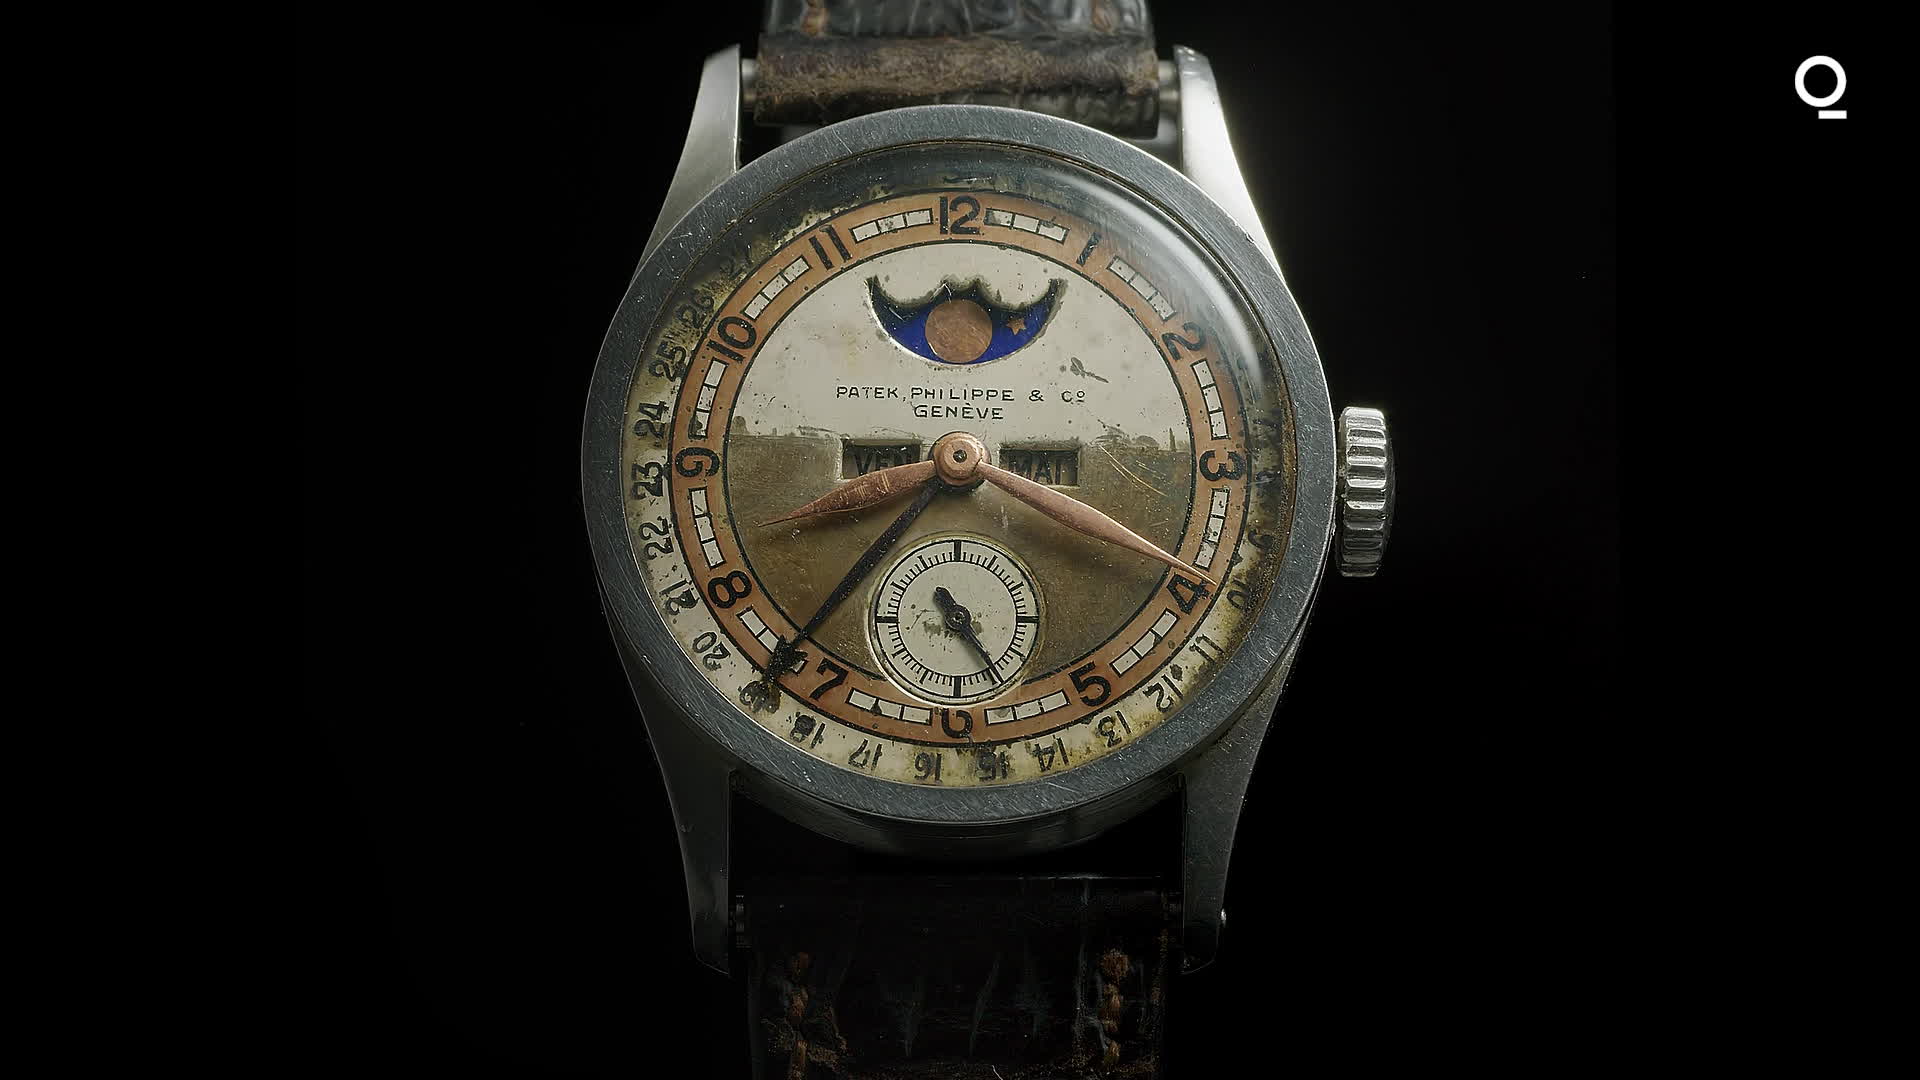 Watch China's Last Emperor's Watch Sells for $6.2 Million - Bloomberg